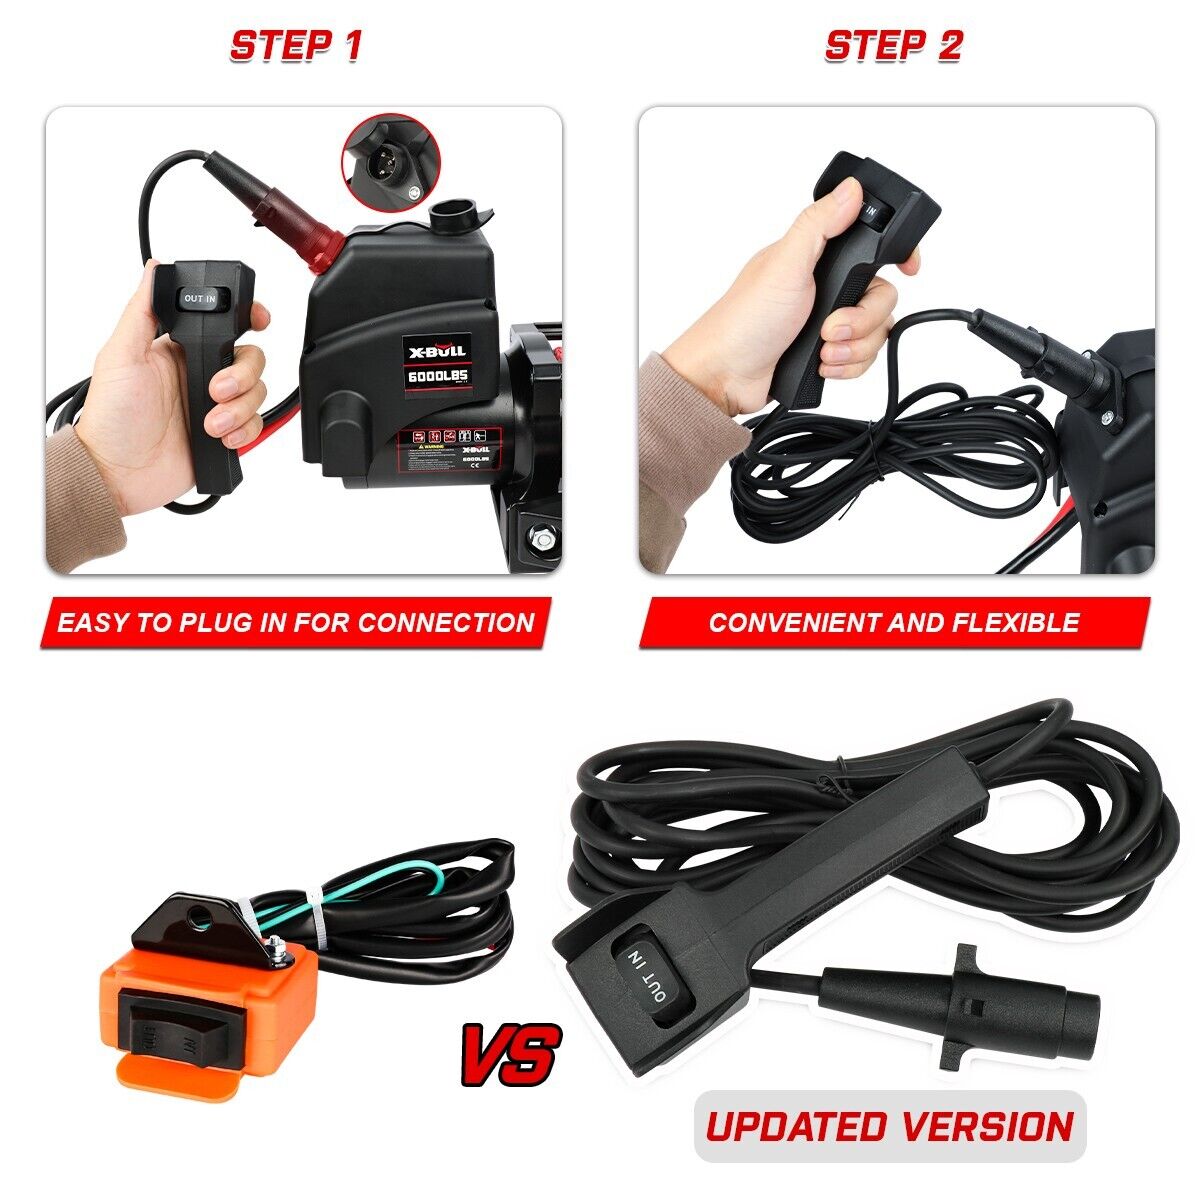 Easy-Install 6000LBS Electric Winch, Synthetic Rope, Wireless Remote - X-BULL